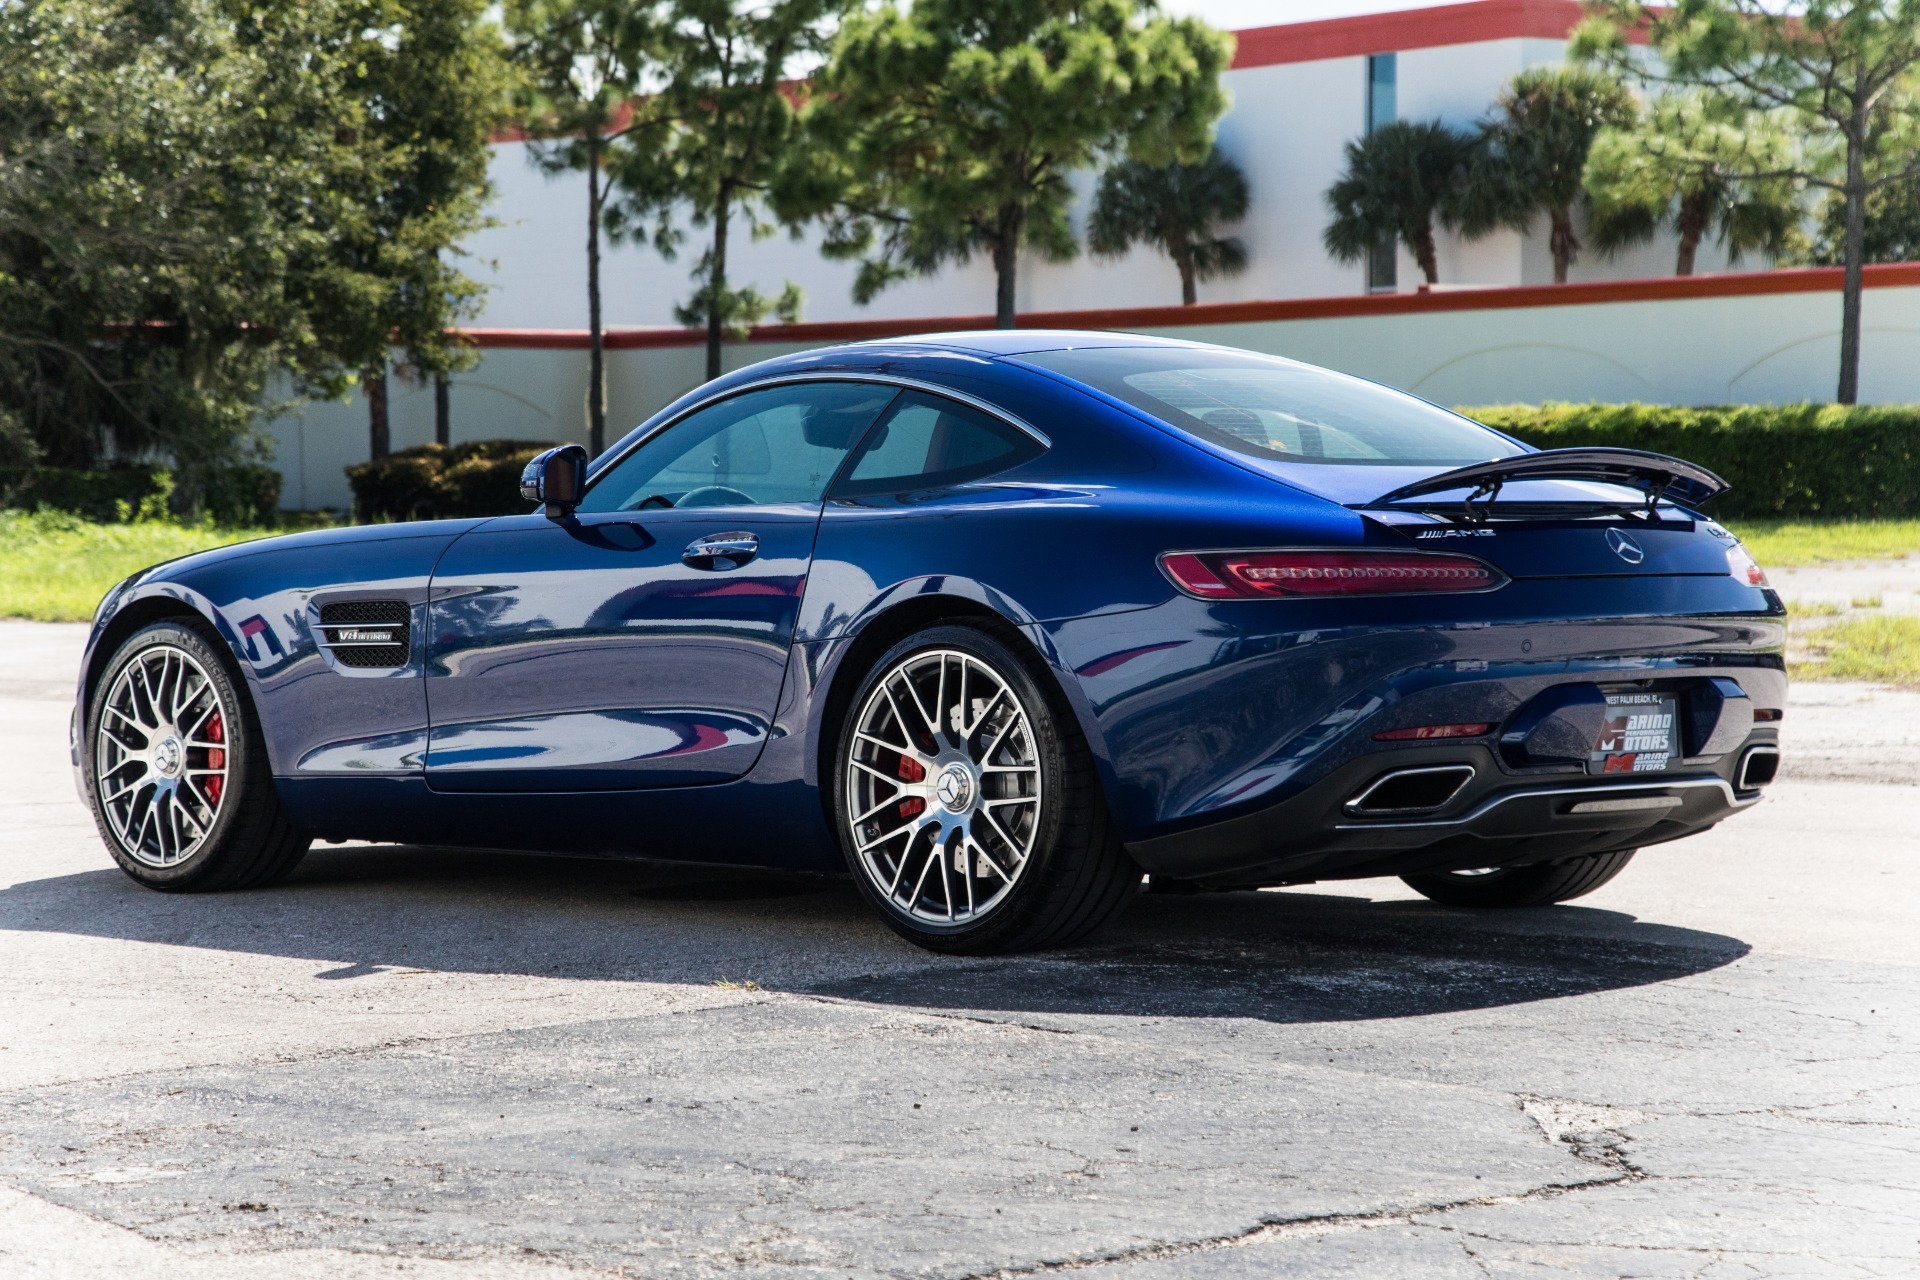 Used 2016 Mercedes Benz AMG GT S For Sale 92 900 Marino 